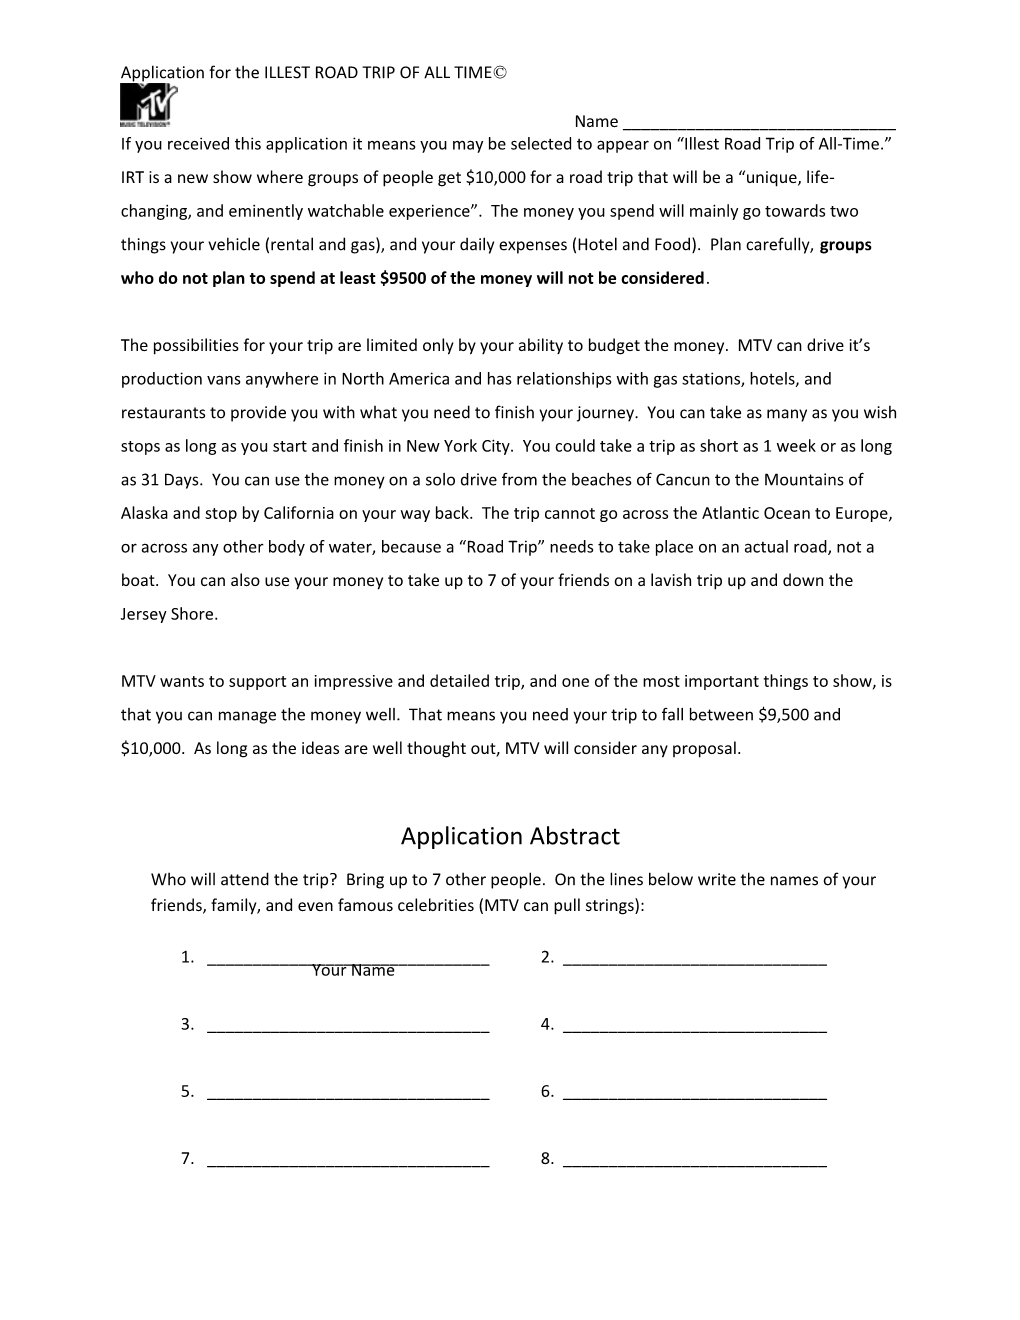 If You Received This Application It Means You May Be Selected to Appear on Illest Road